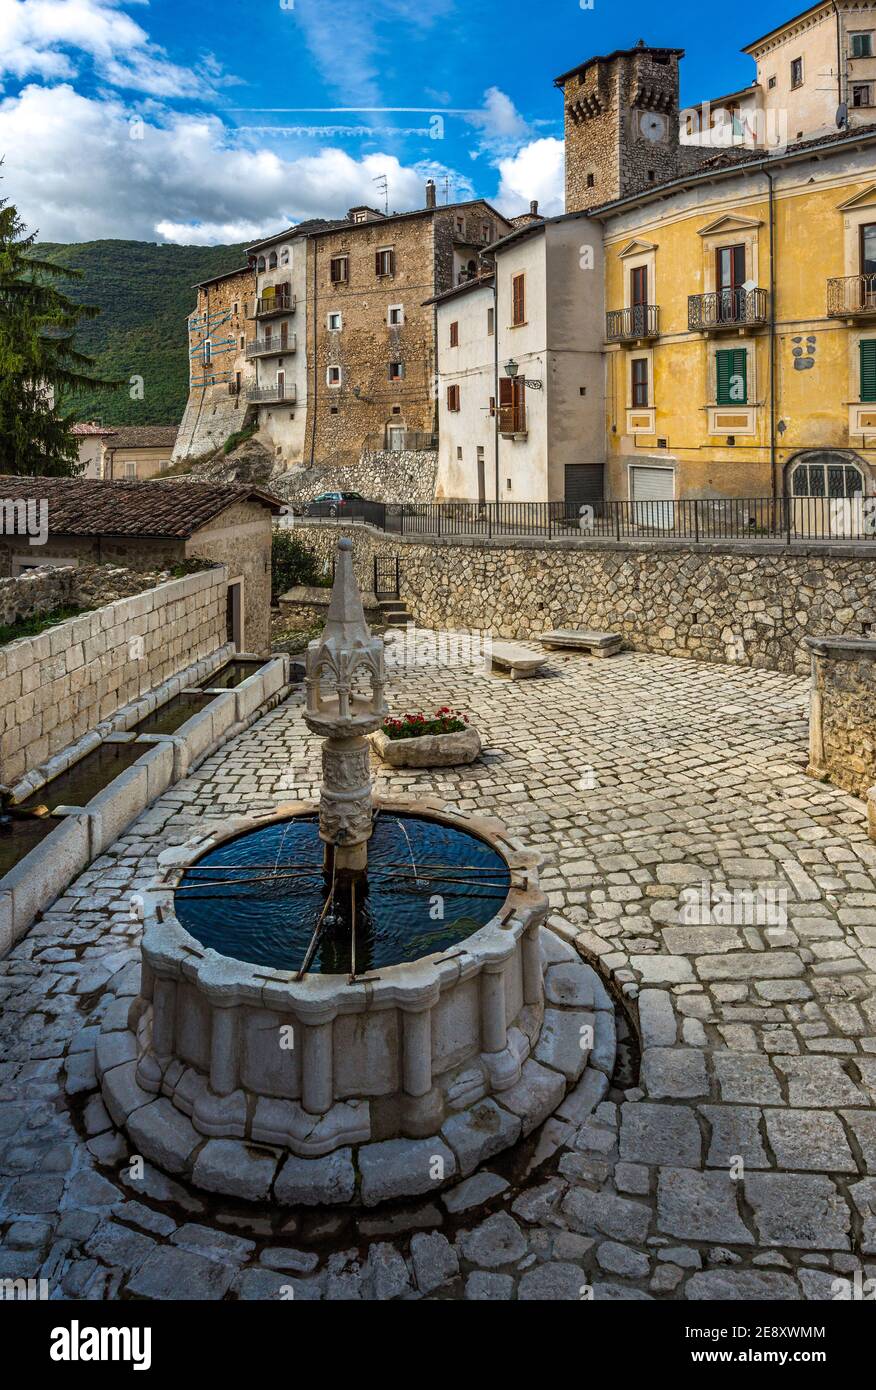 The medieval square of Fontecchio with its fountain and paved floor. Province of L'Aquila, Abruzzo, Italy, Europe Stock Photo